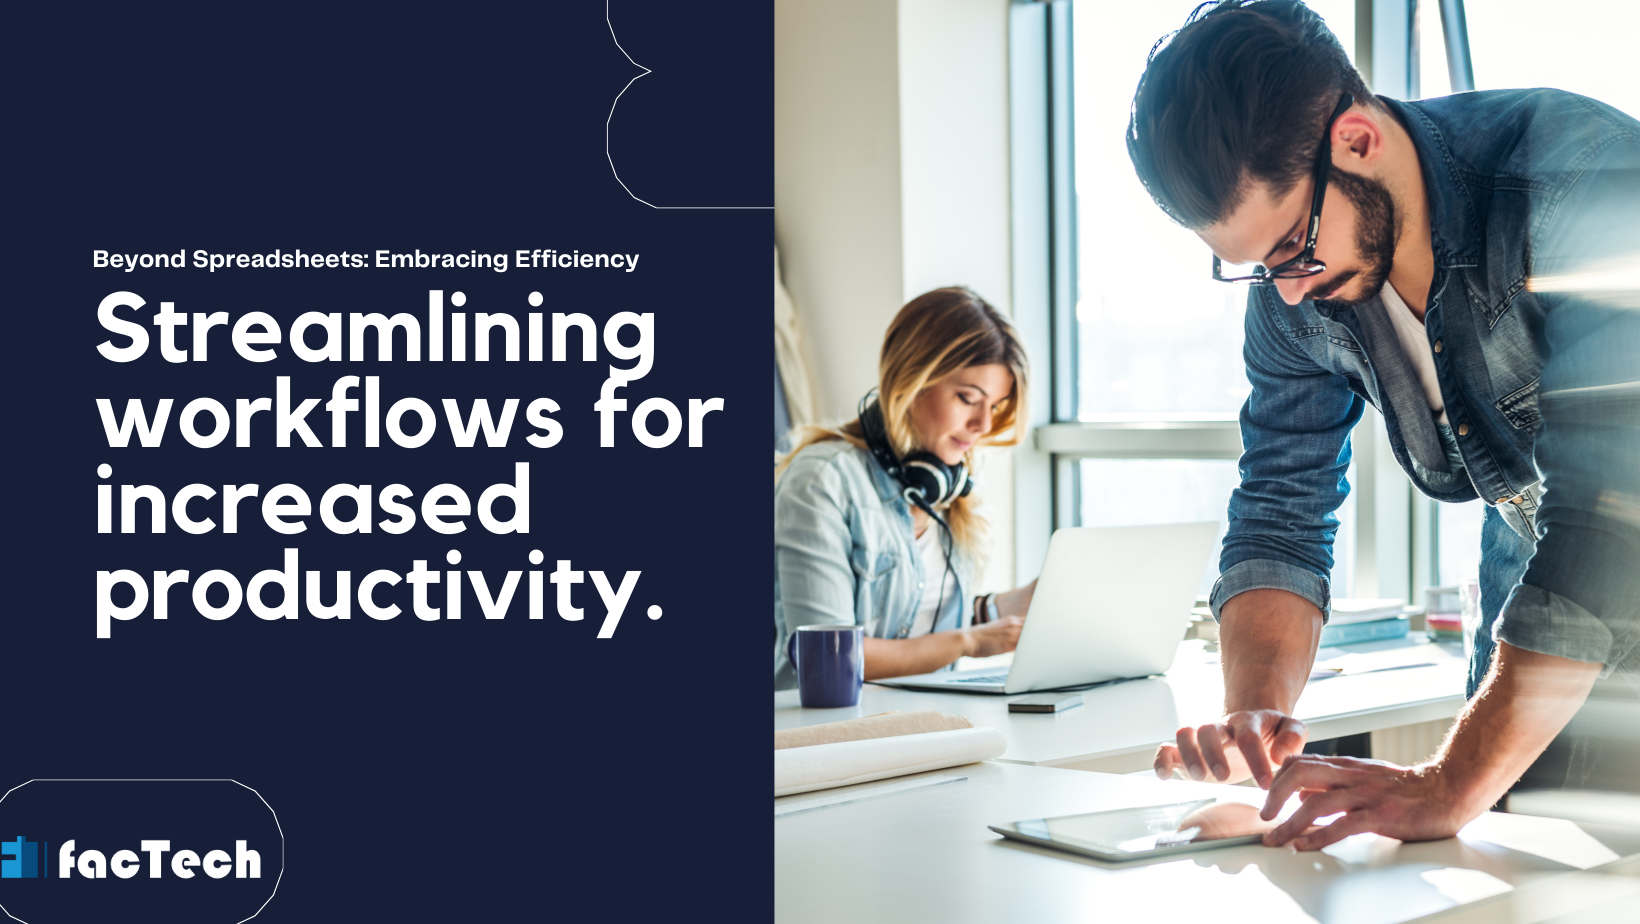 Streamlining workflows for increased productivity.